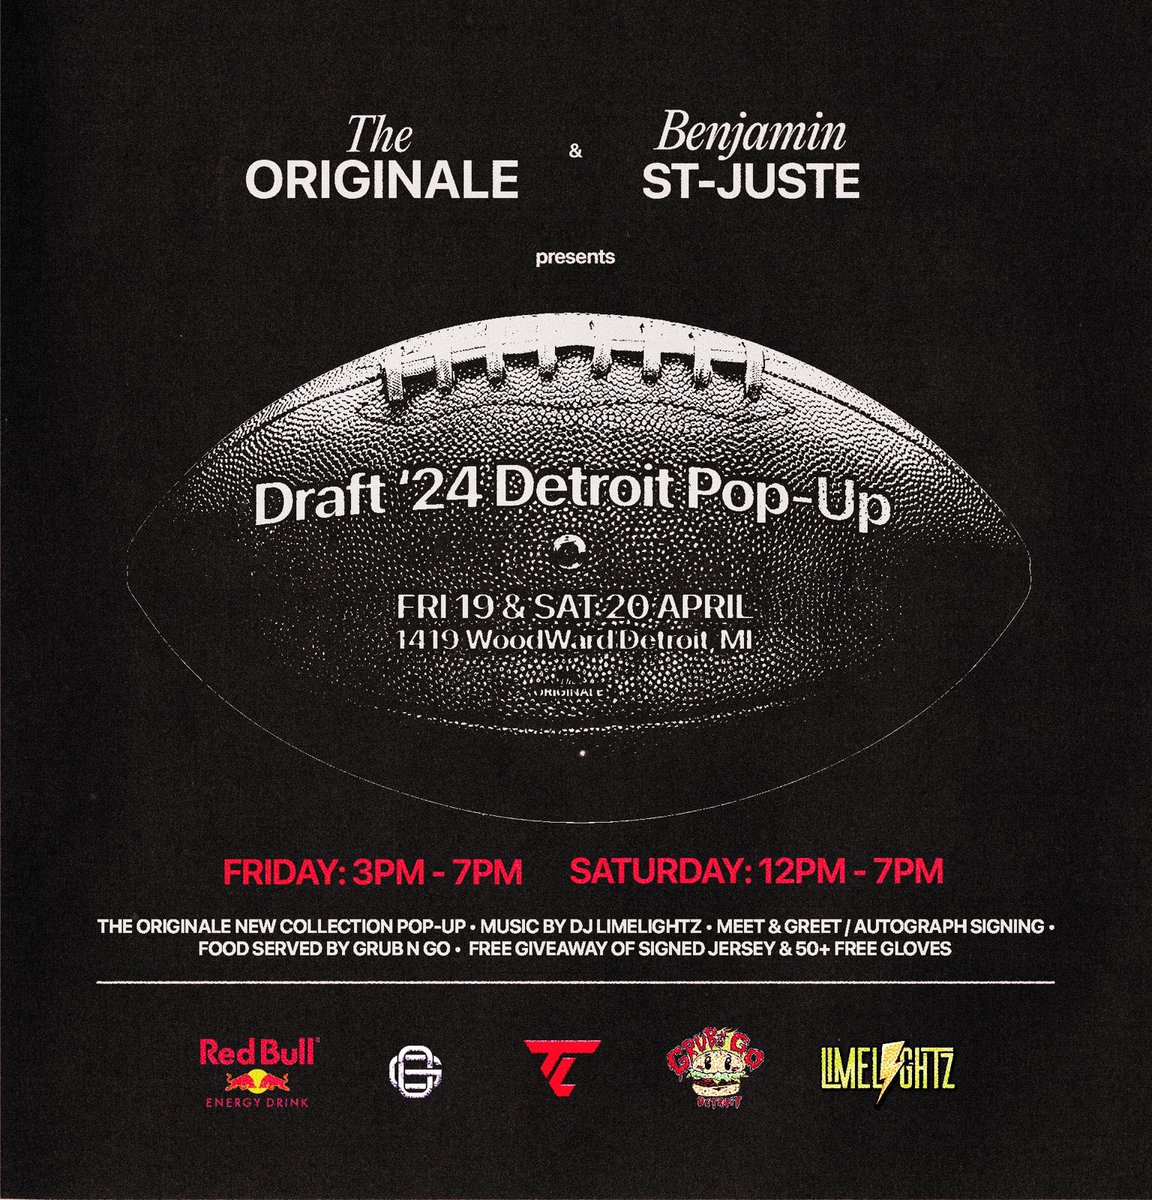 If you’re in the Detroit area this weekend pull up on us. We’re serving food/drinks, handing out free football gloves & free giveaways with a value of $3000 +🔥 #TheOriginale